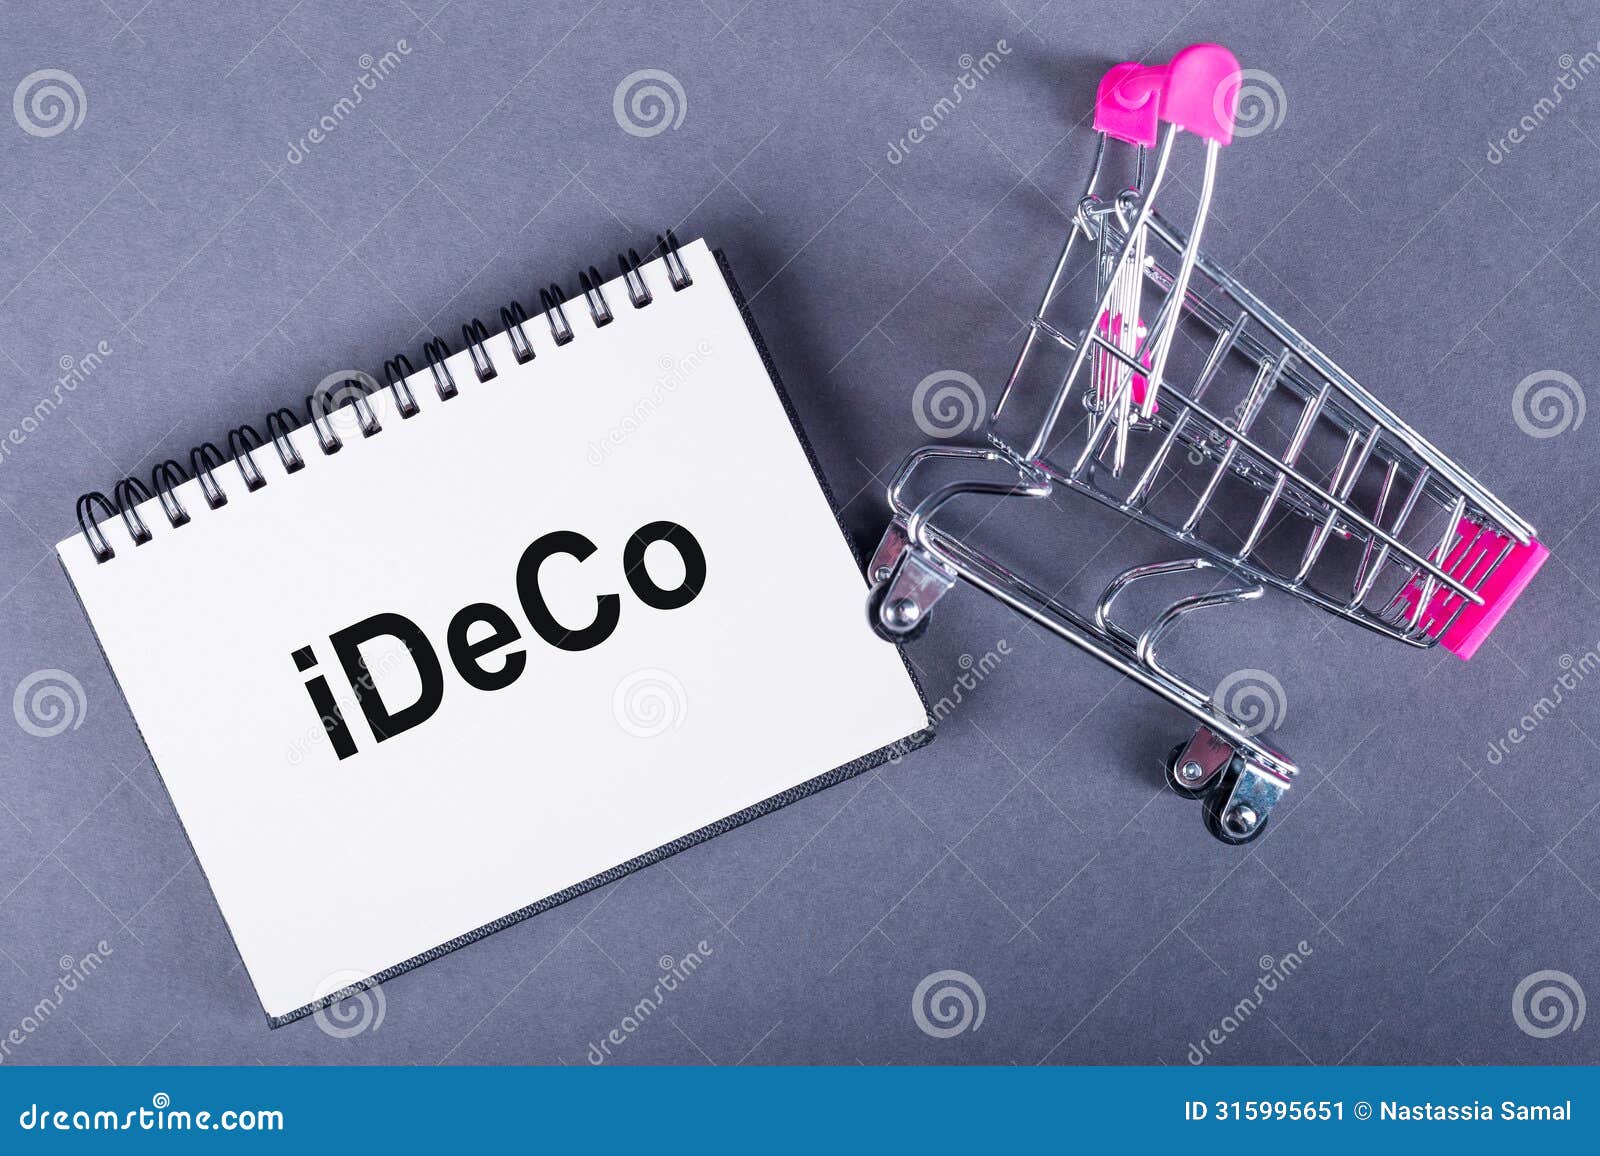 ideco is the japanese government's defined contribution pension plan. translation: pension book